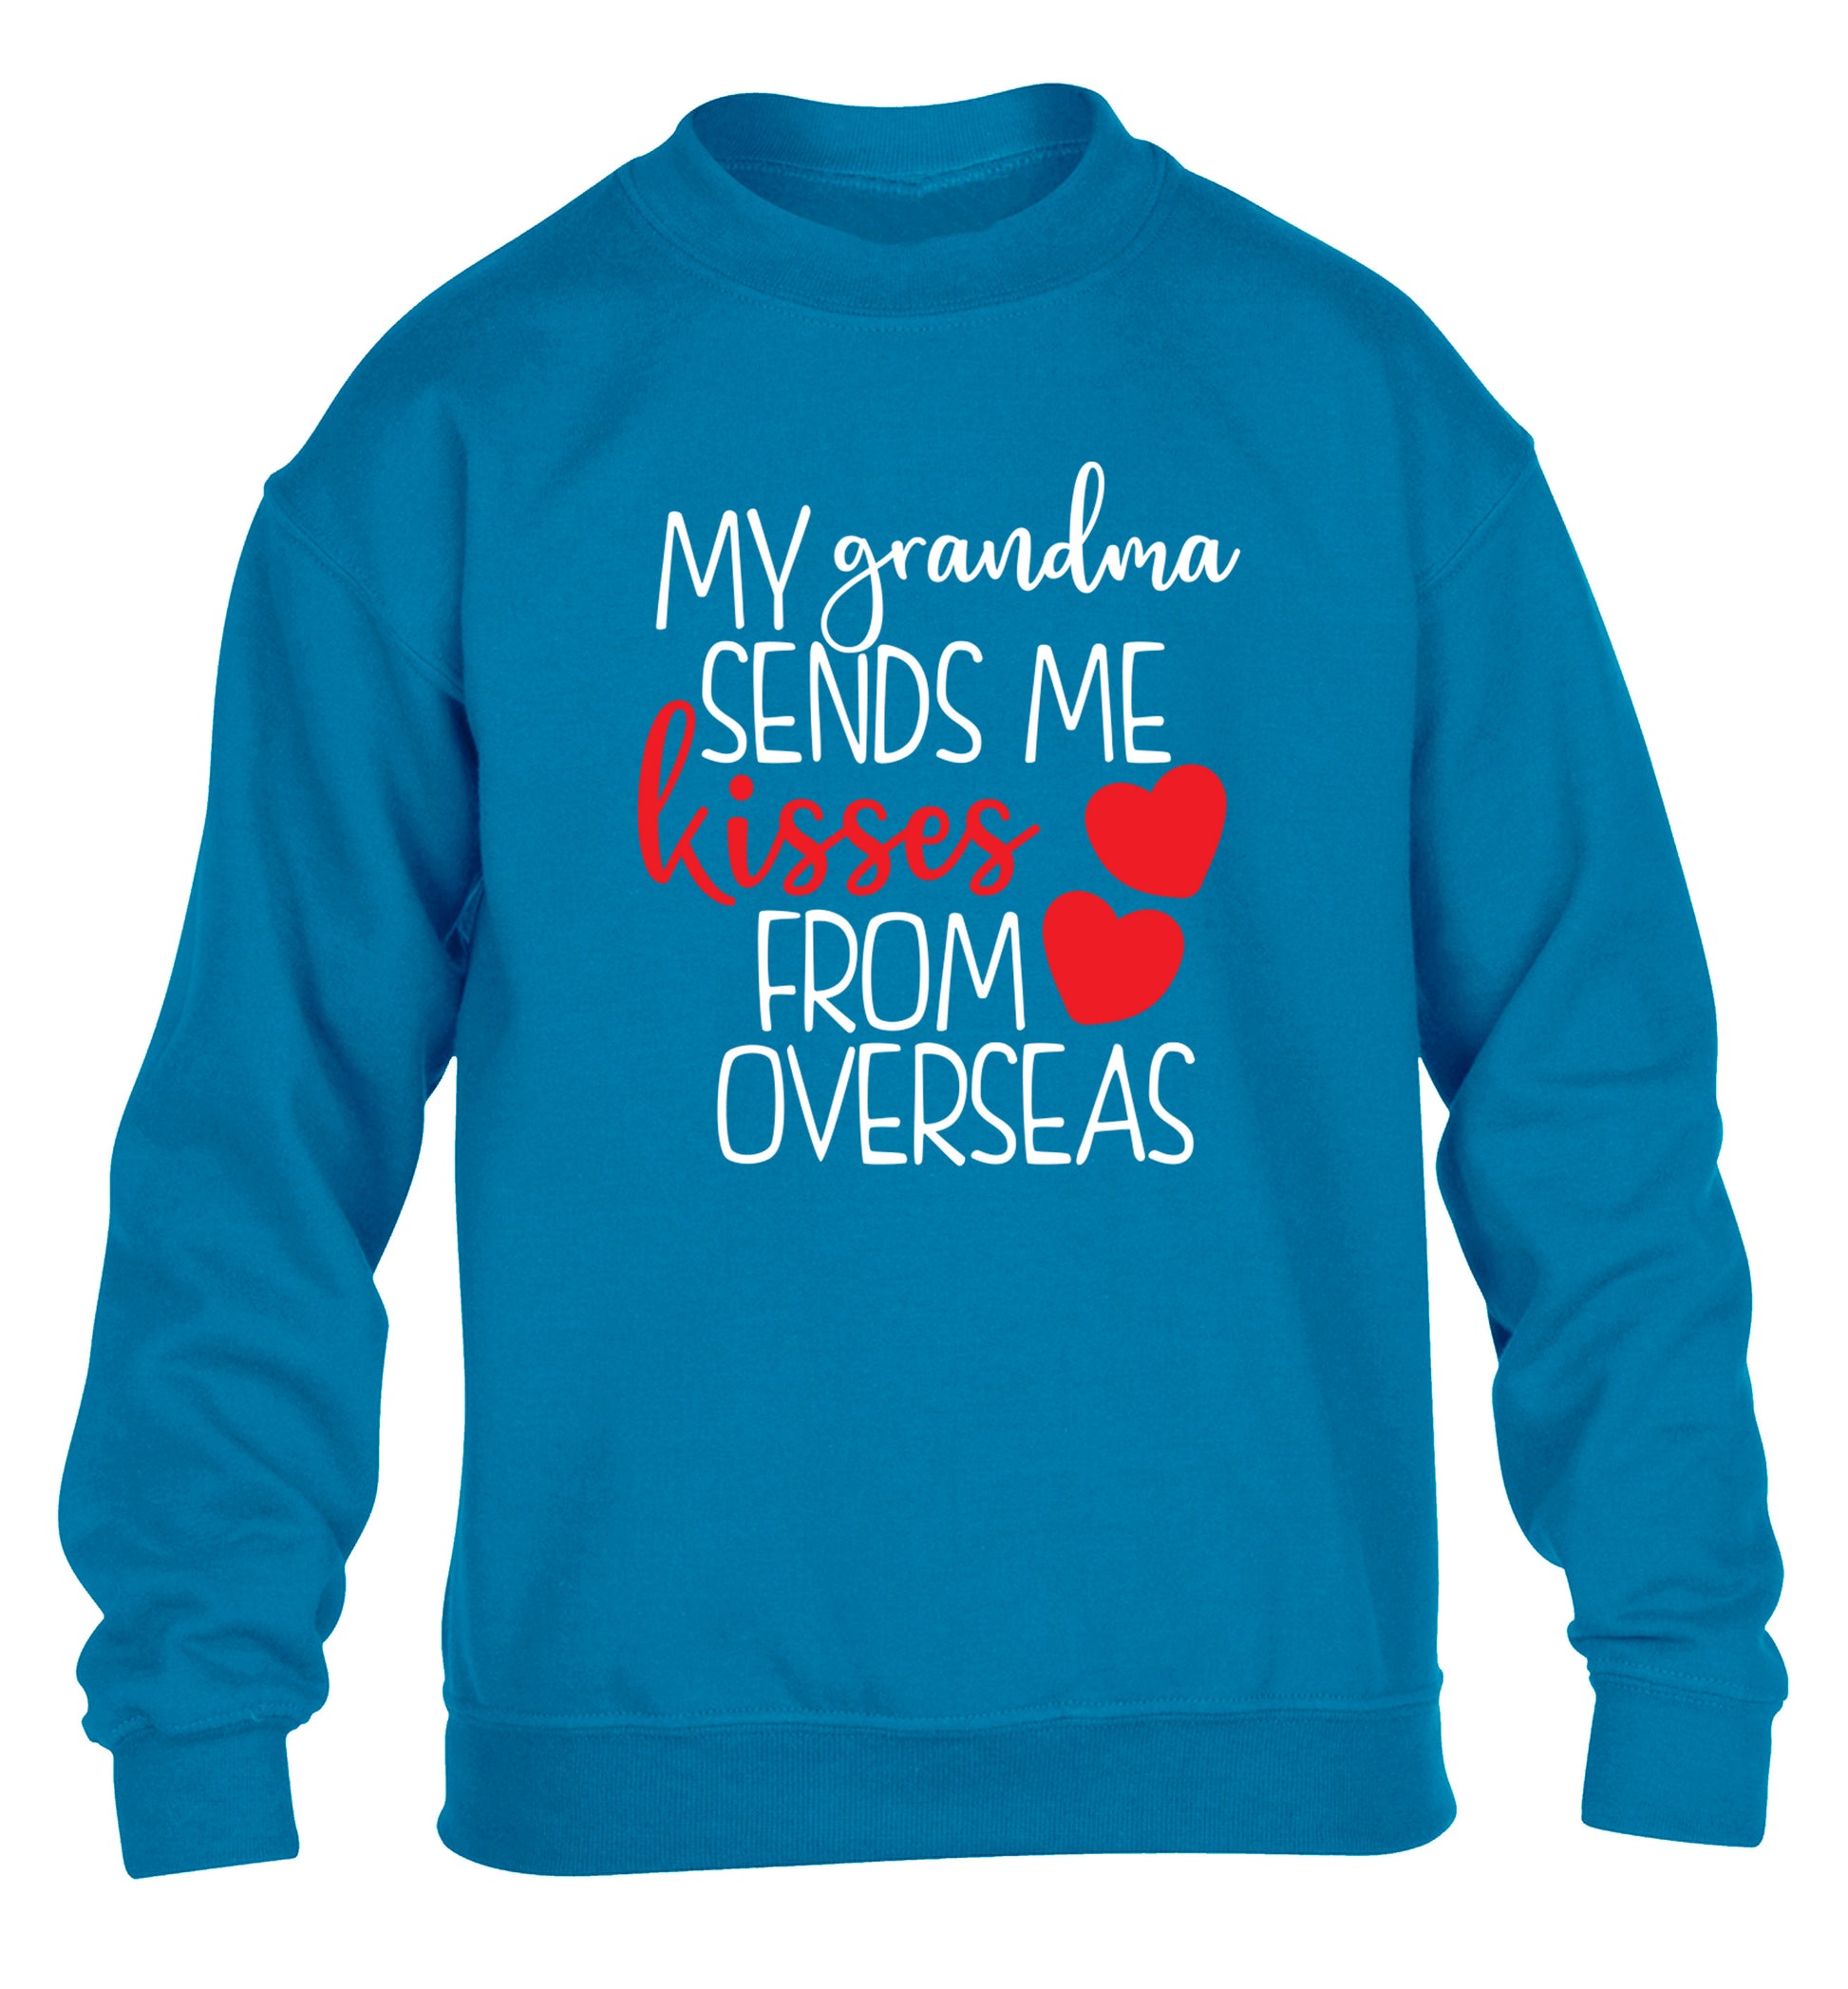 My Grandma sends me kisses from overseas children's blue sweater 12-13 Years